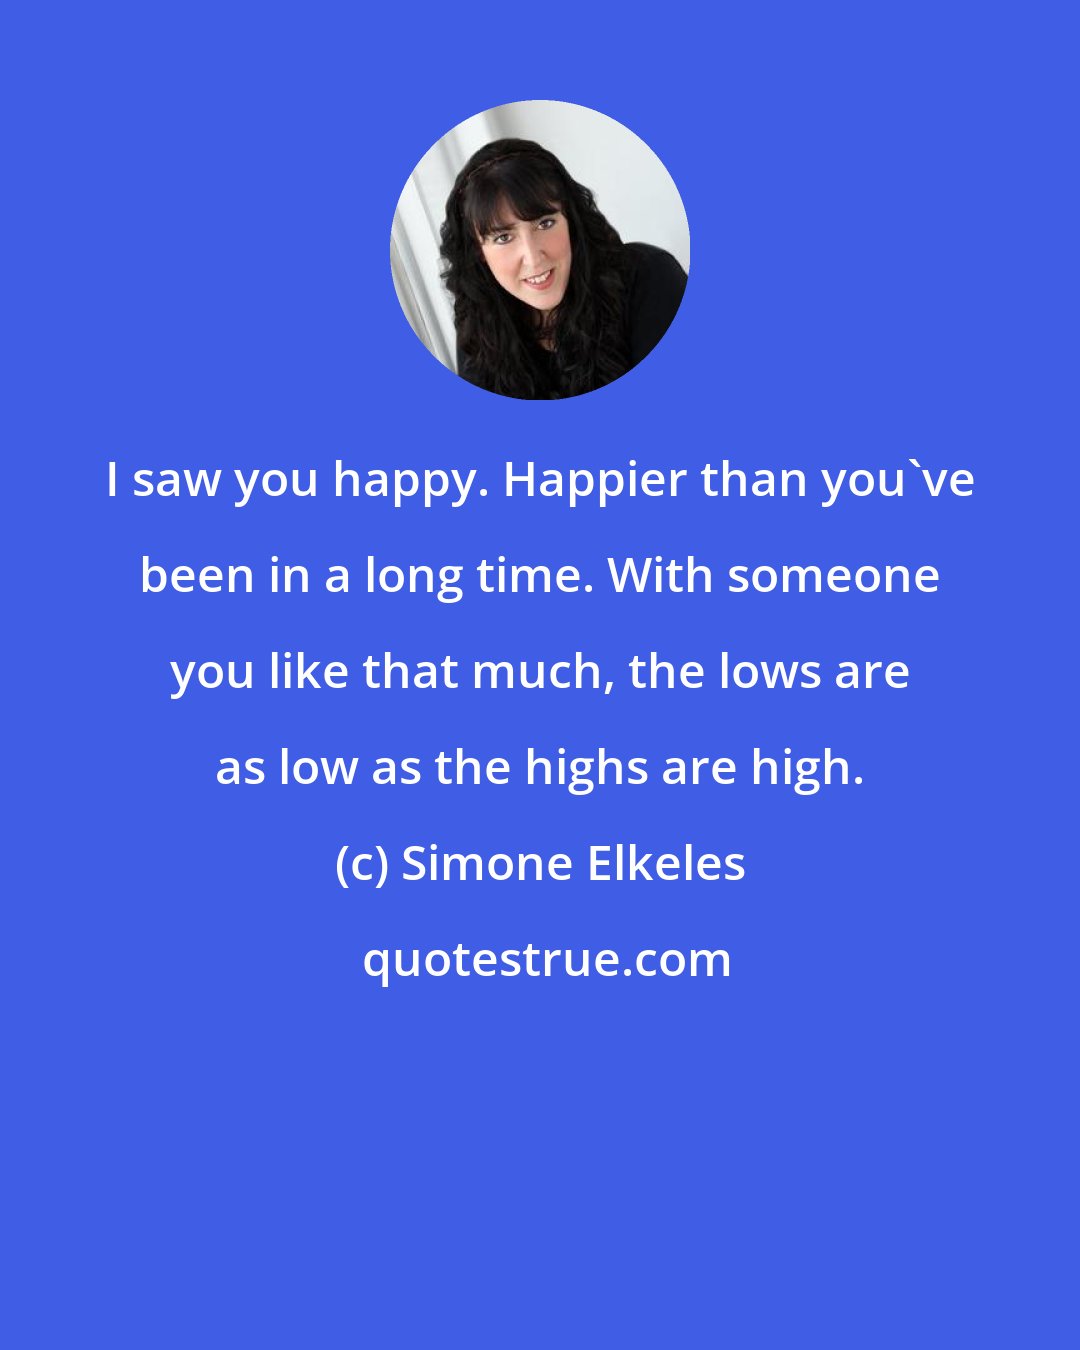 Simone Elkeles: I saw you happy. Happier than you've been in a long time. With someone you like that much, the lows are as low as the highs are high.